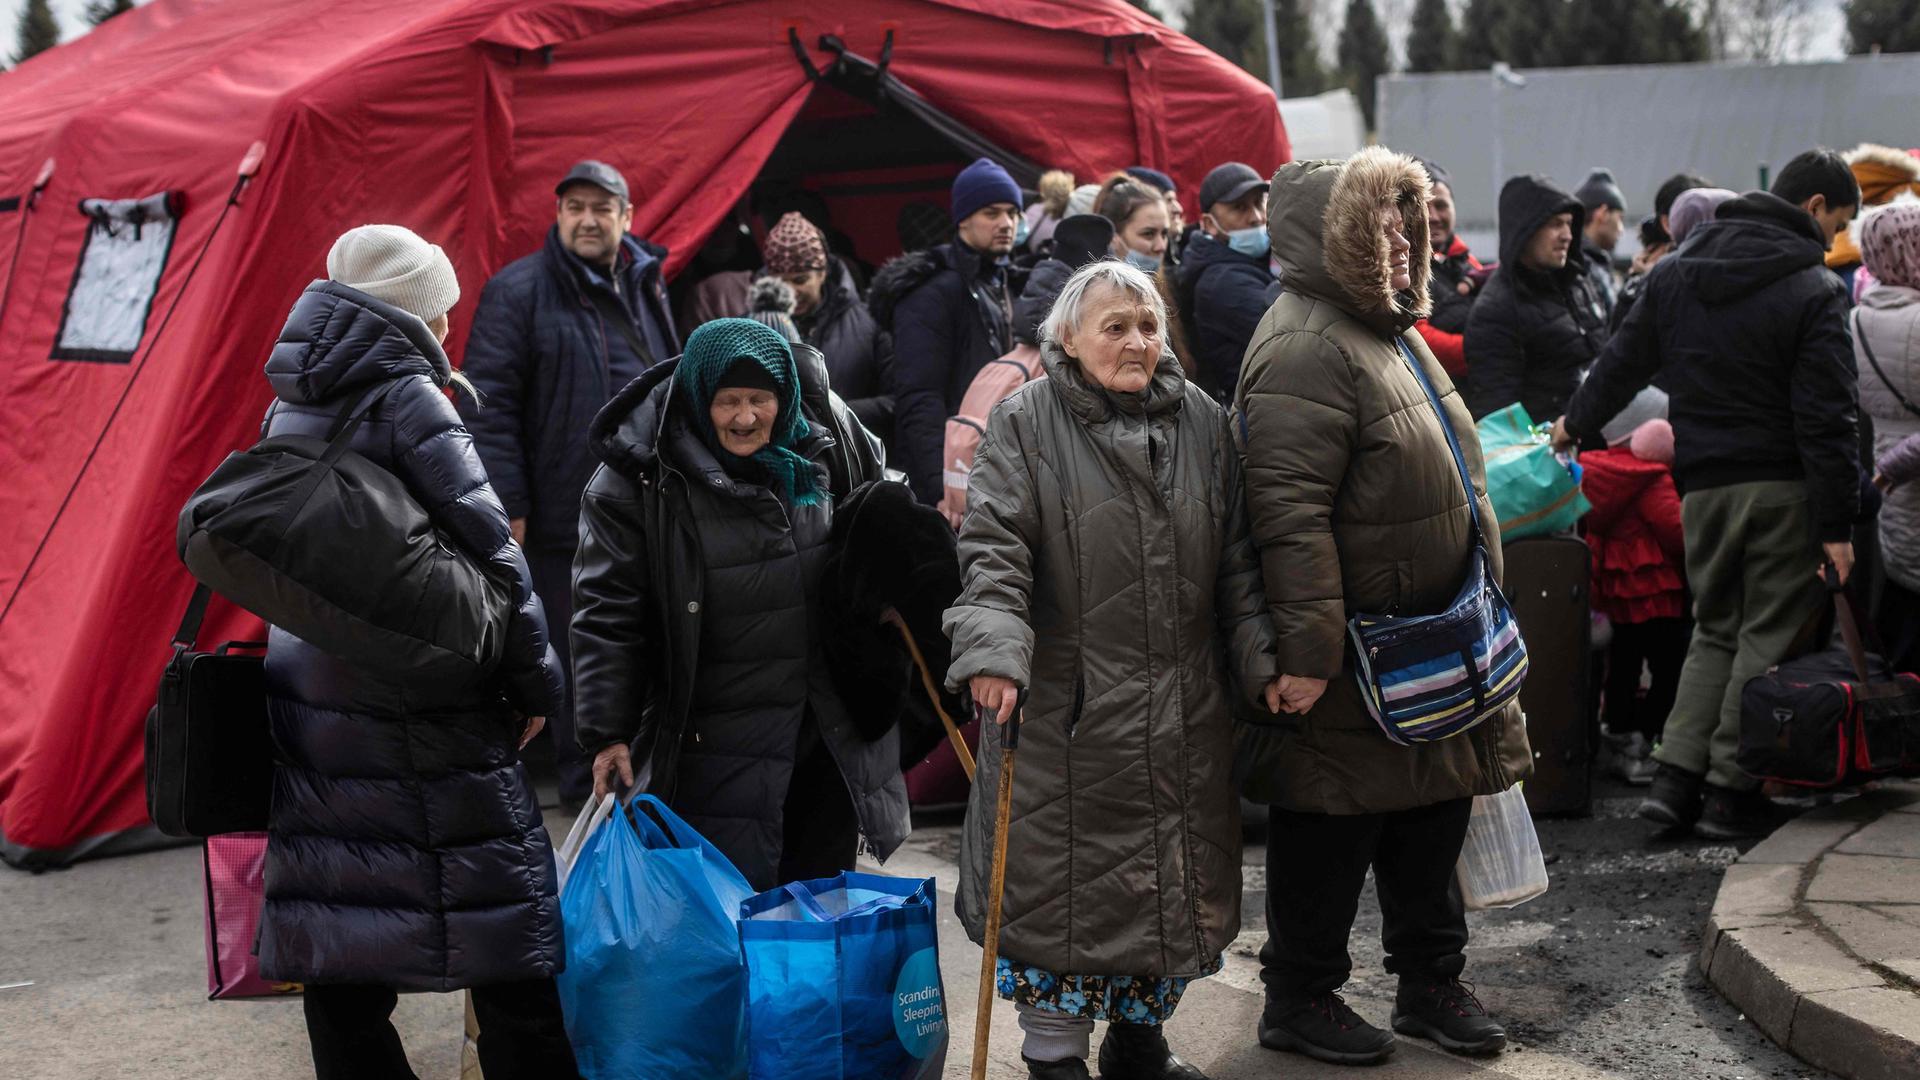 Refugees from Ukraine are seen as they arrive at the border crossing in Korczowa, Poland, March 2, 2022. -